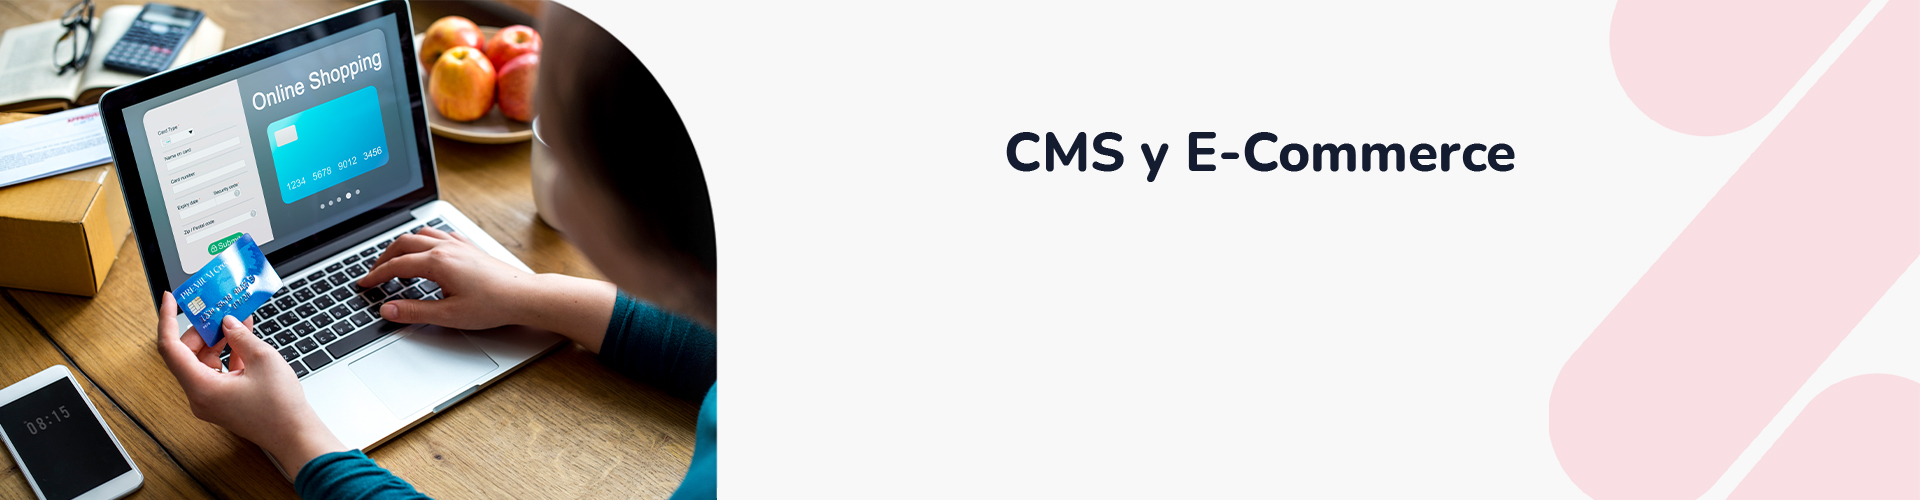 CMS y E-Commerce